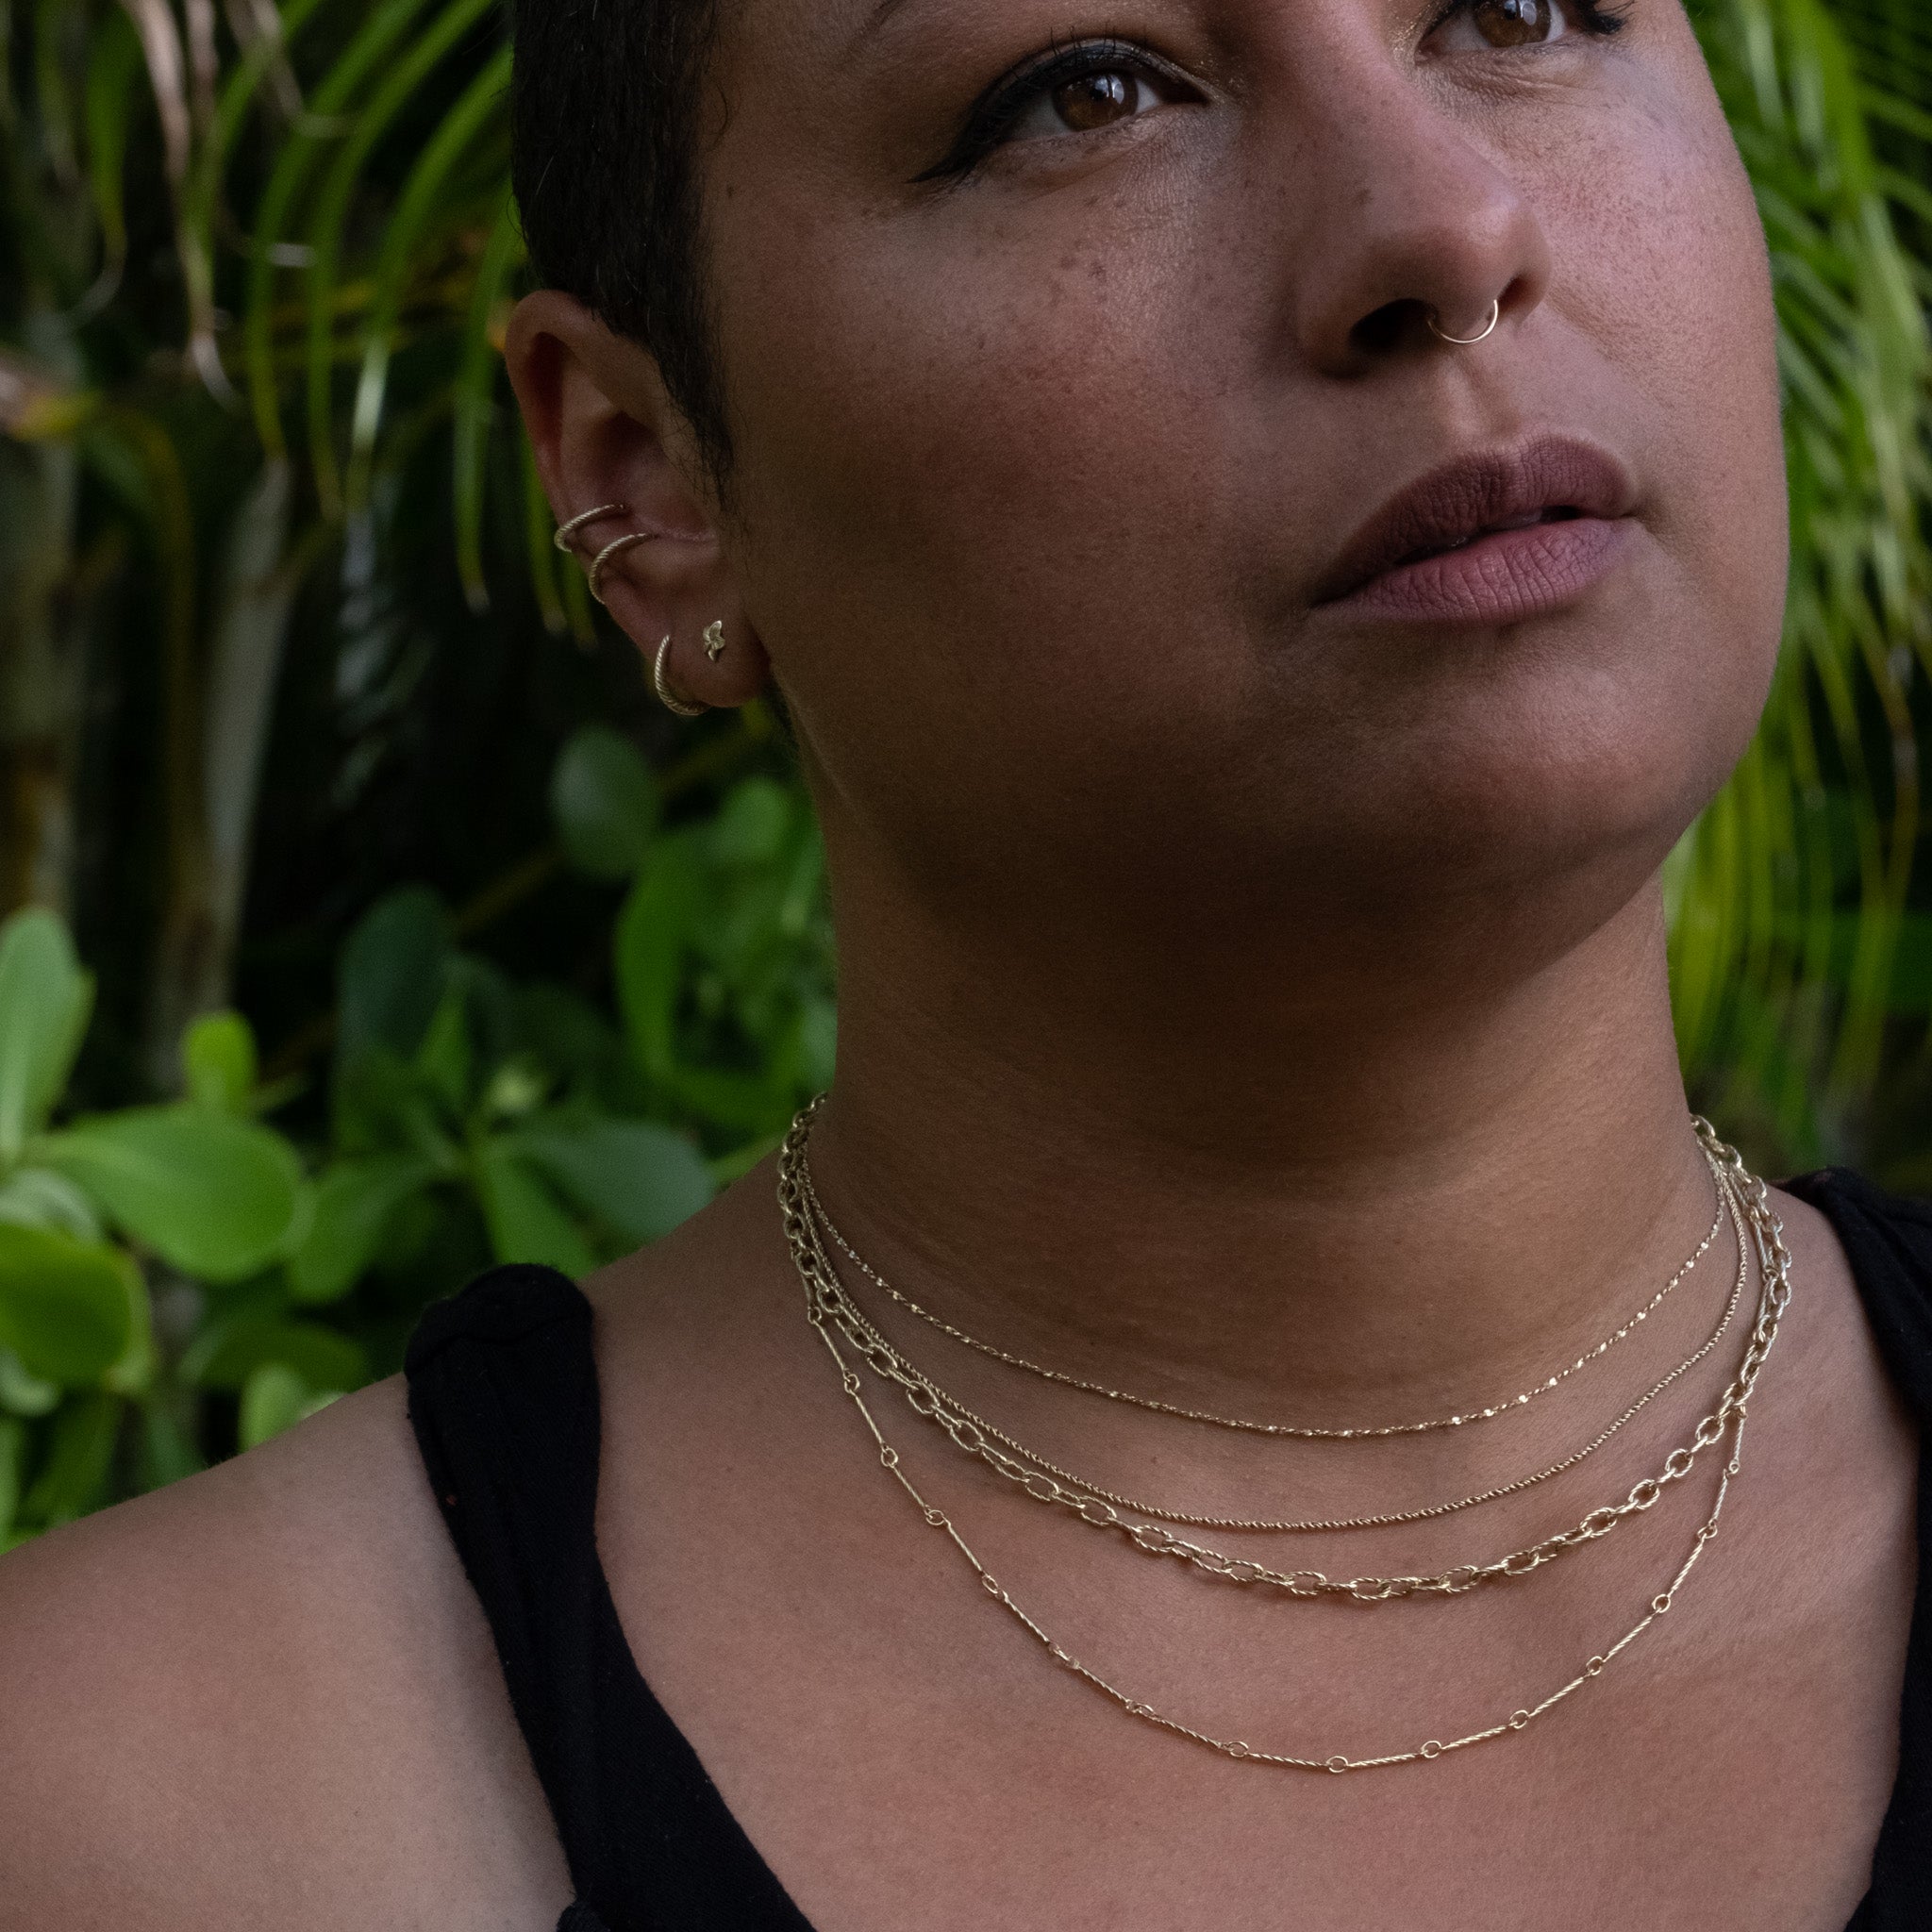 A close up of a person wearing an Aiden Jae Banyan Rope Chain Necklace.